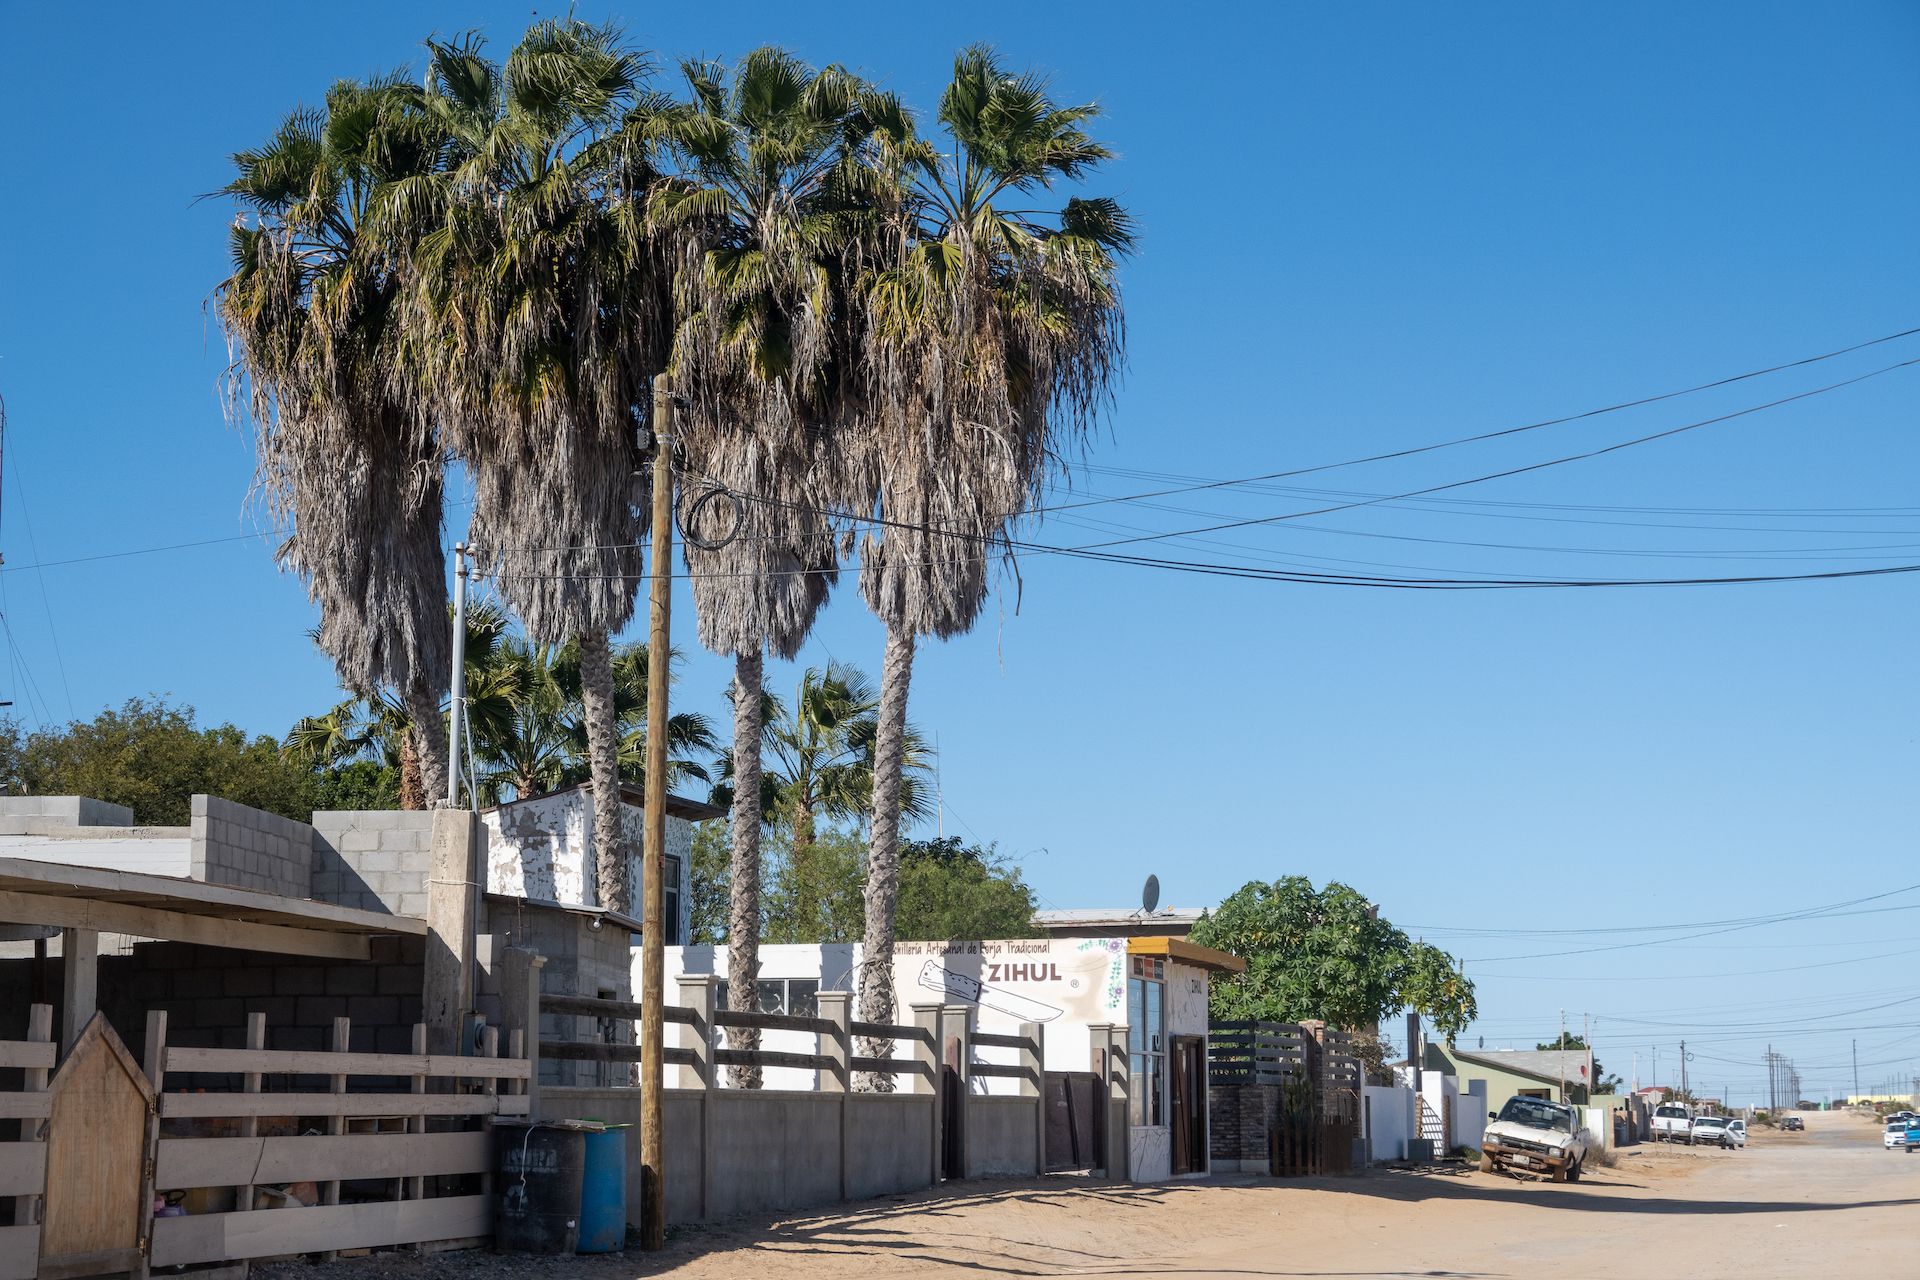 Quiet street of Guerrero Negro where Zihul’s knife shop is located